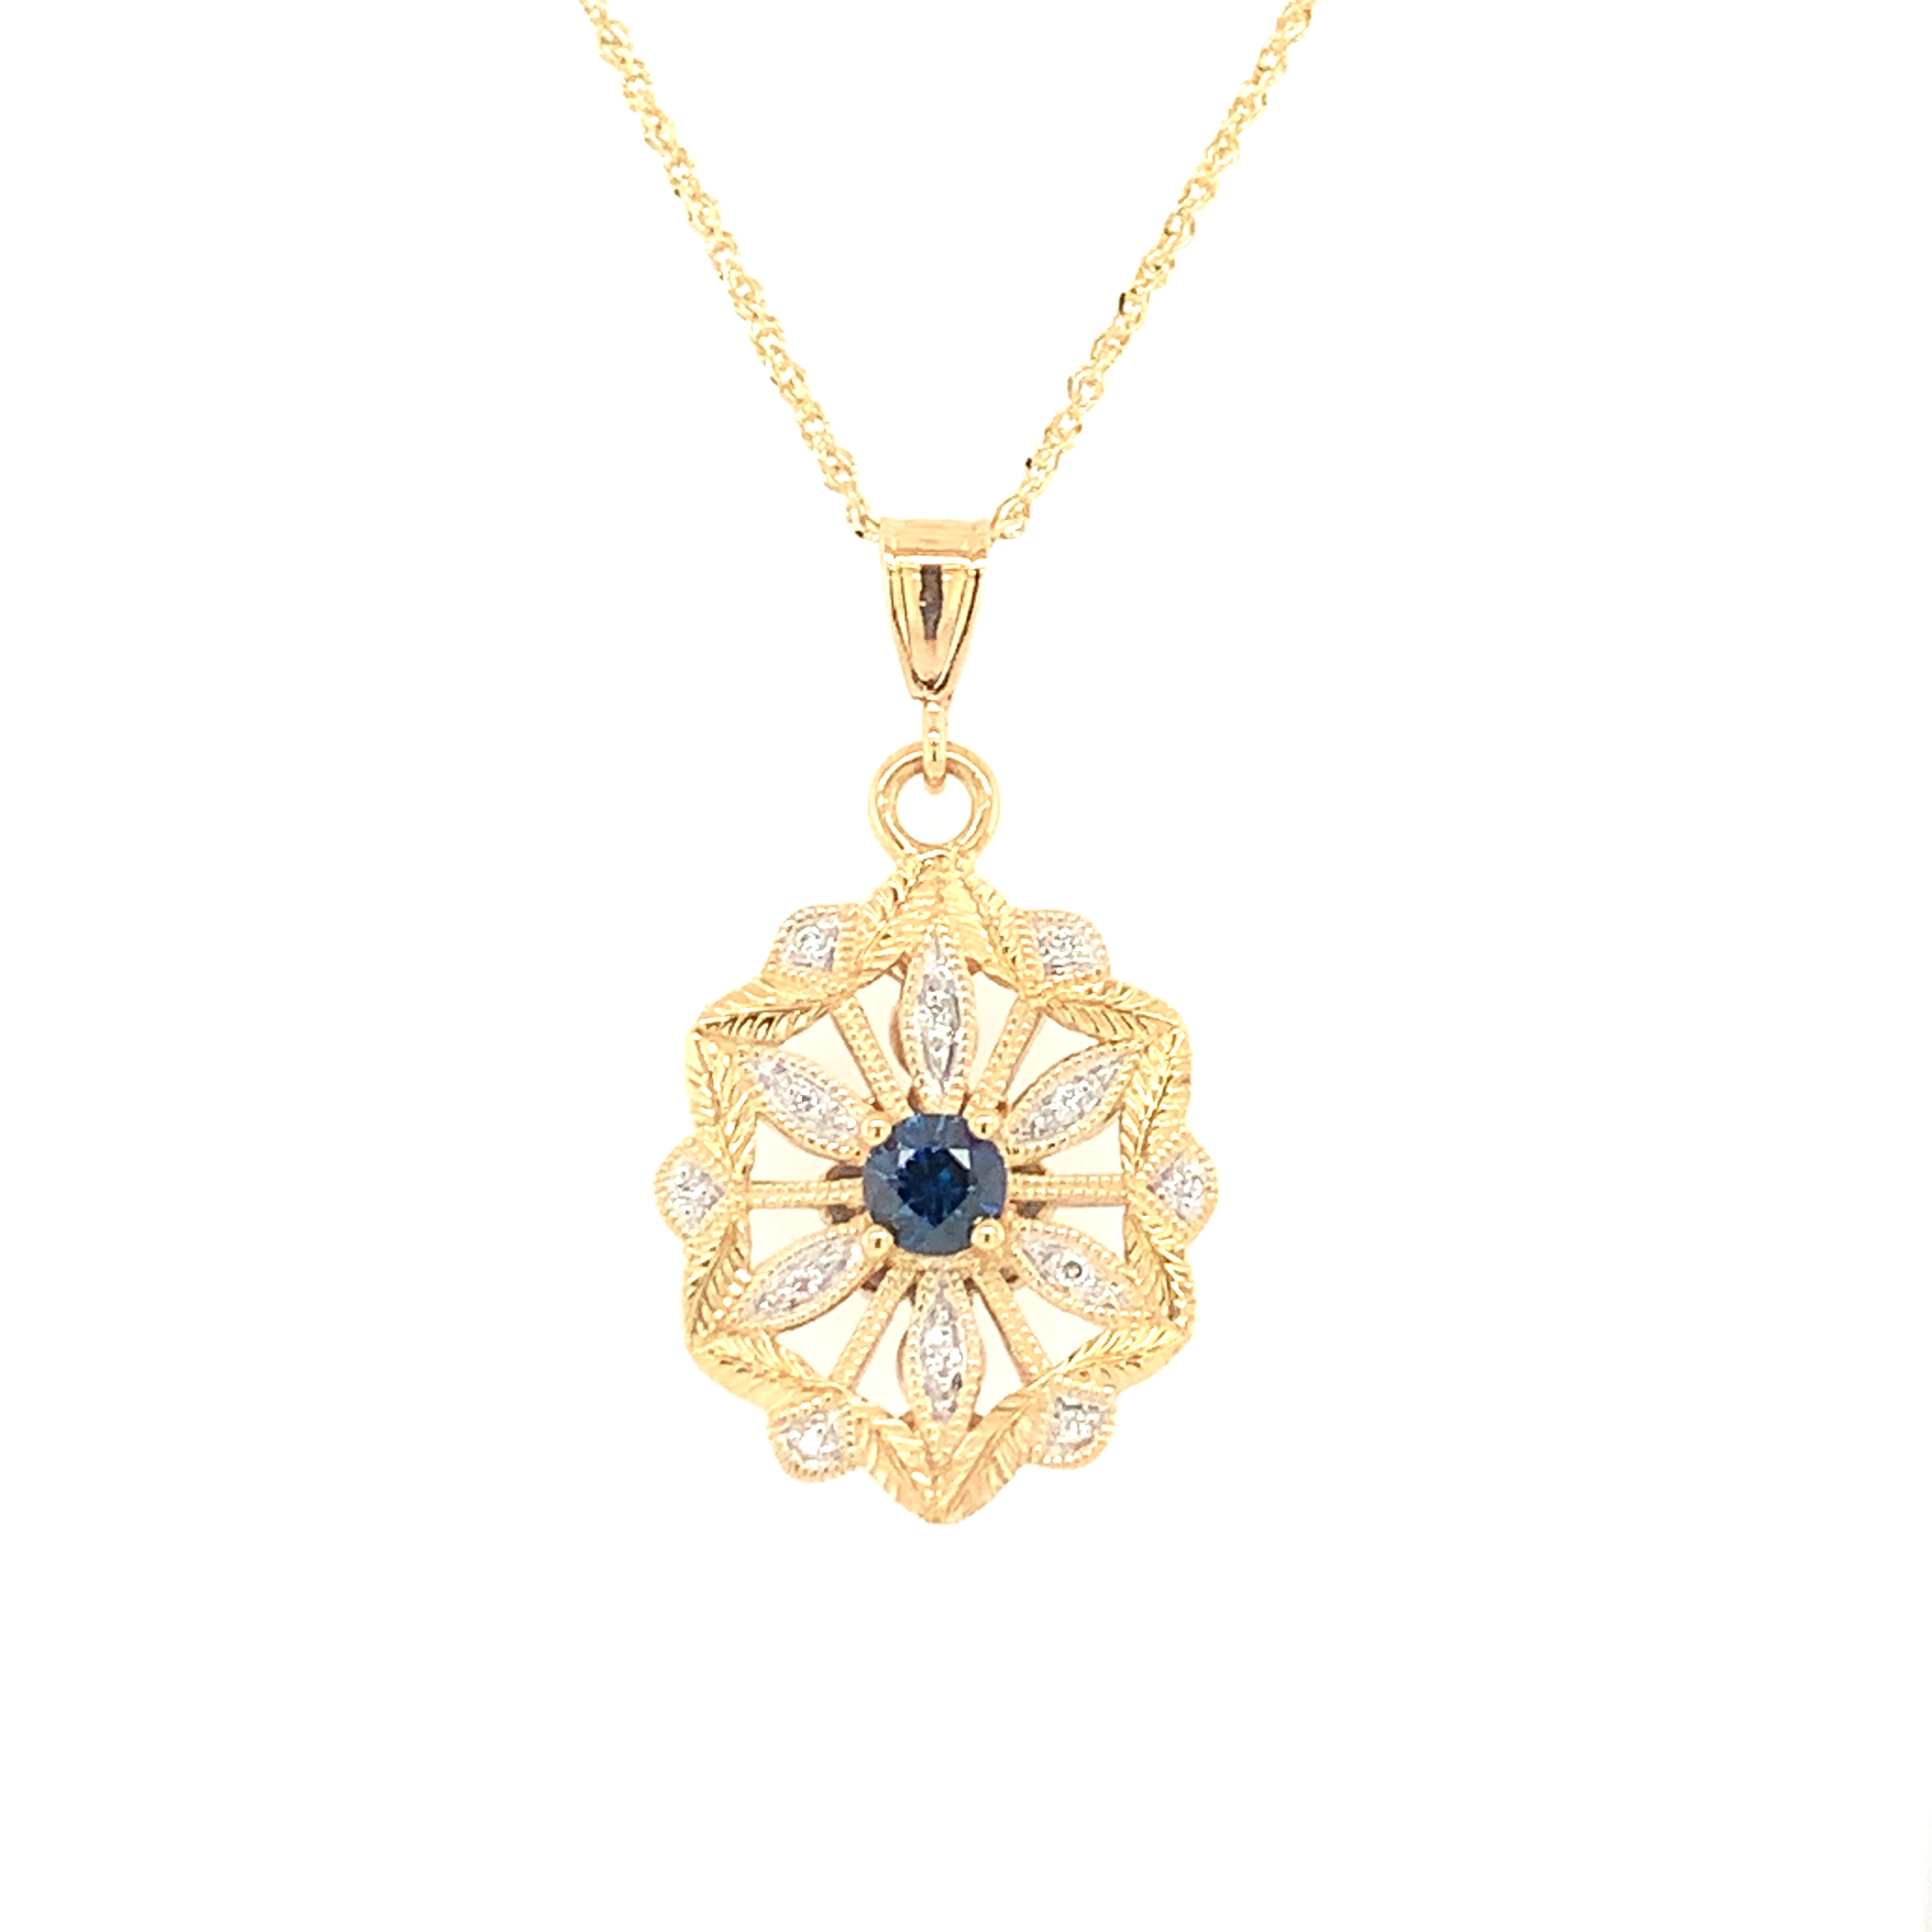 Two-Tone Gold Sapphire Necklace